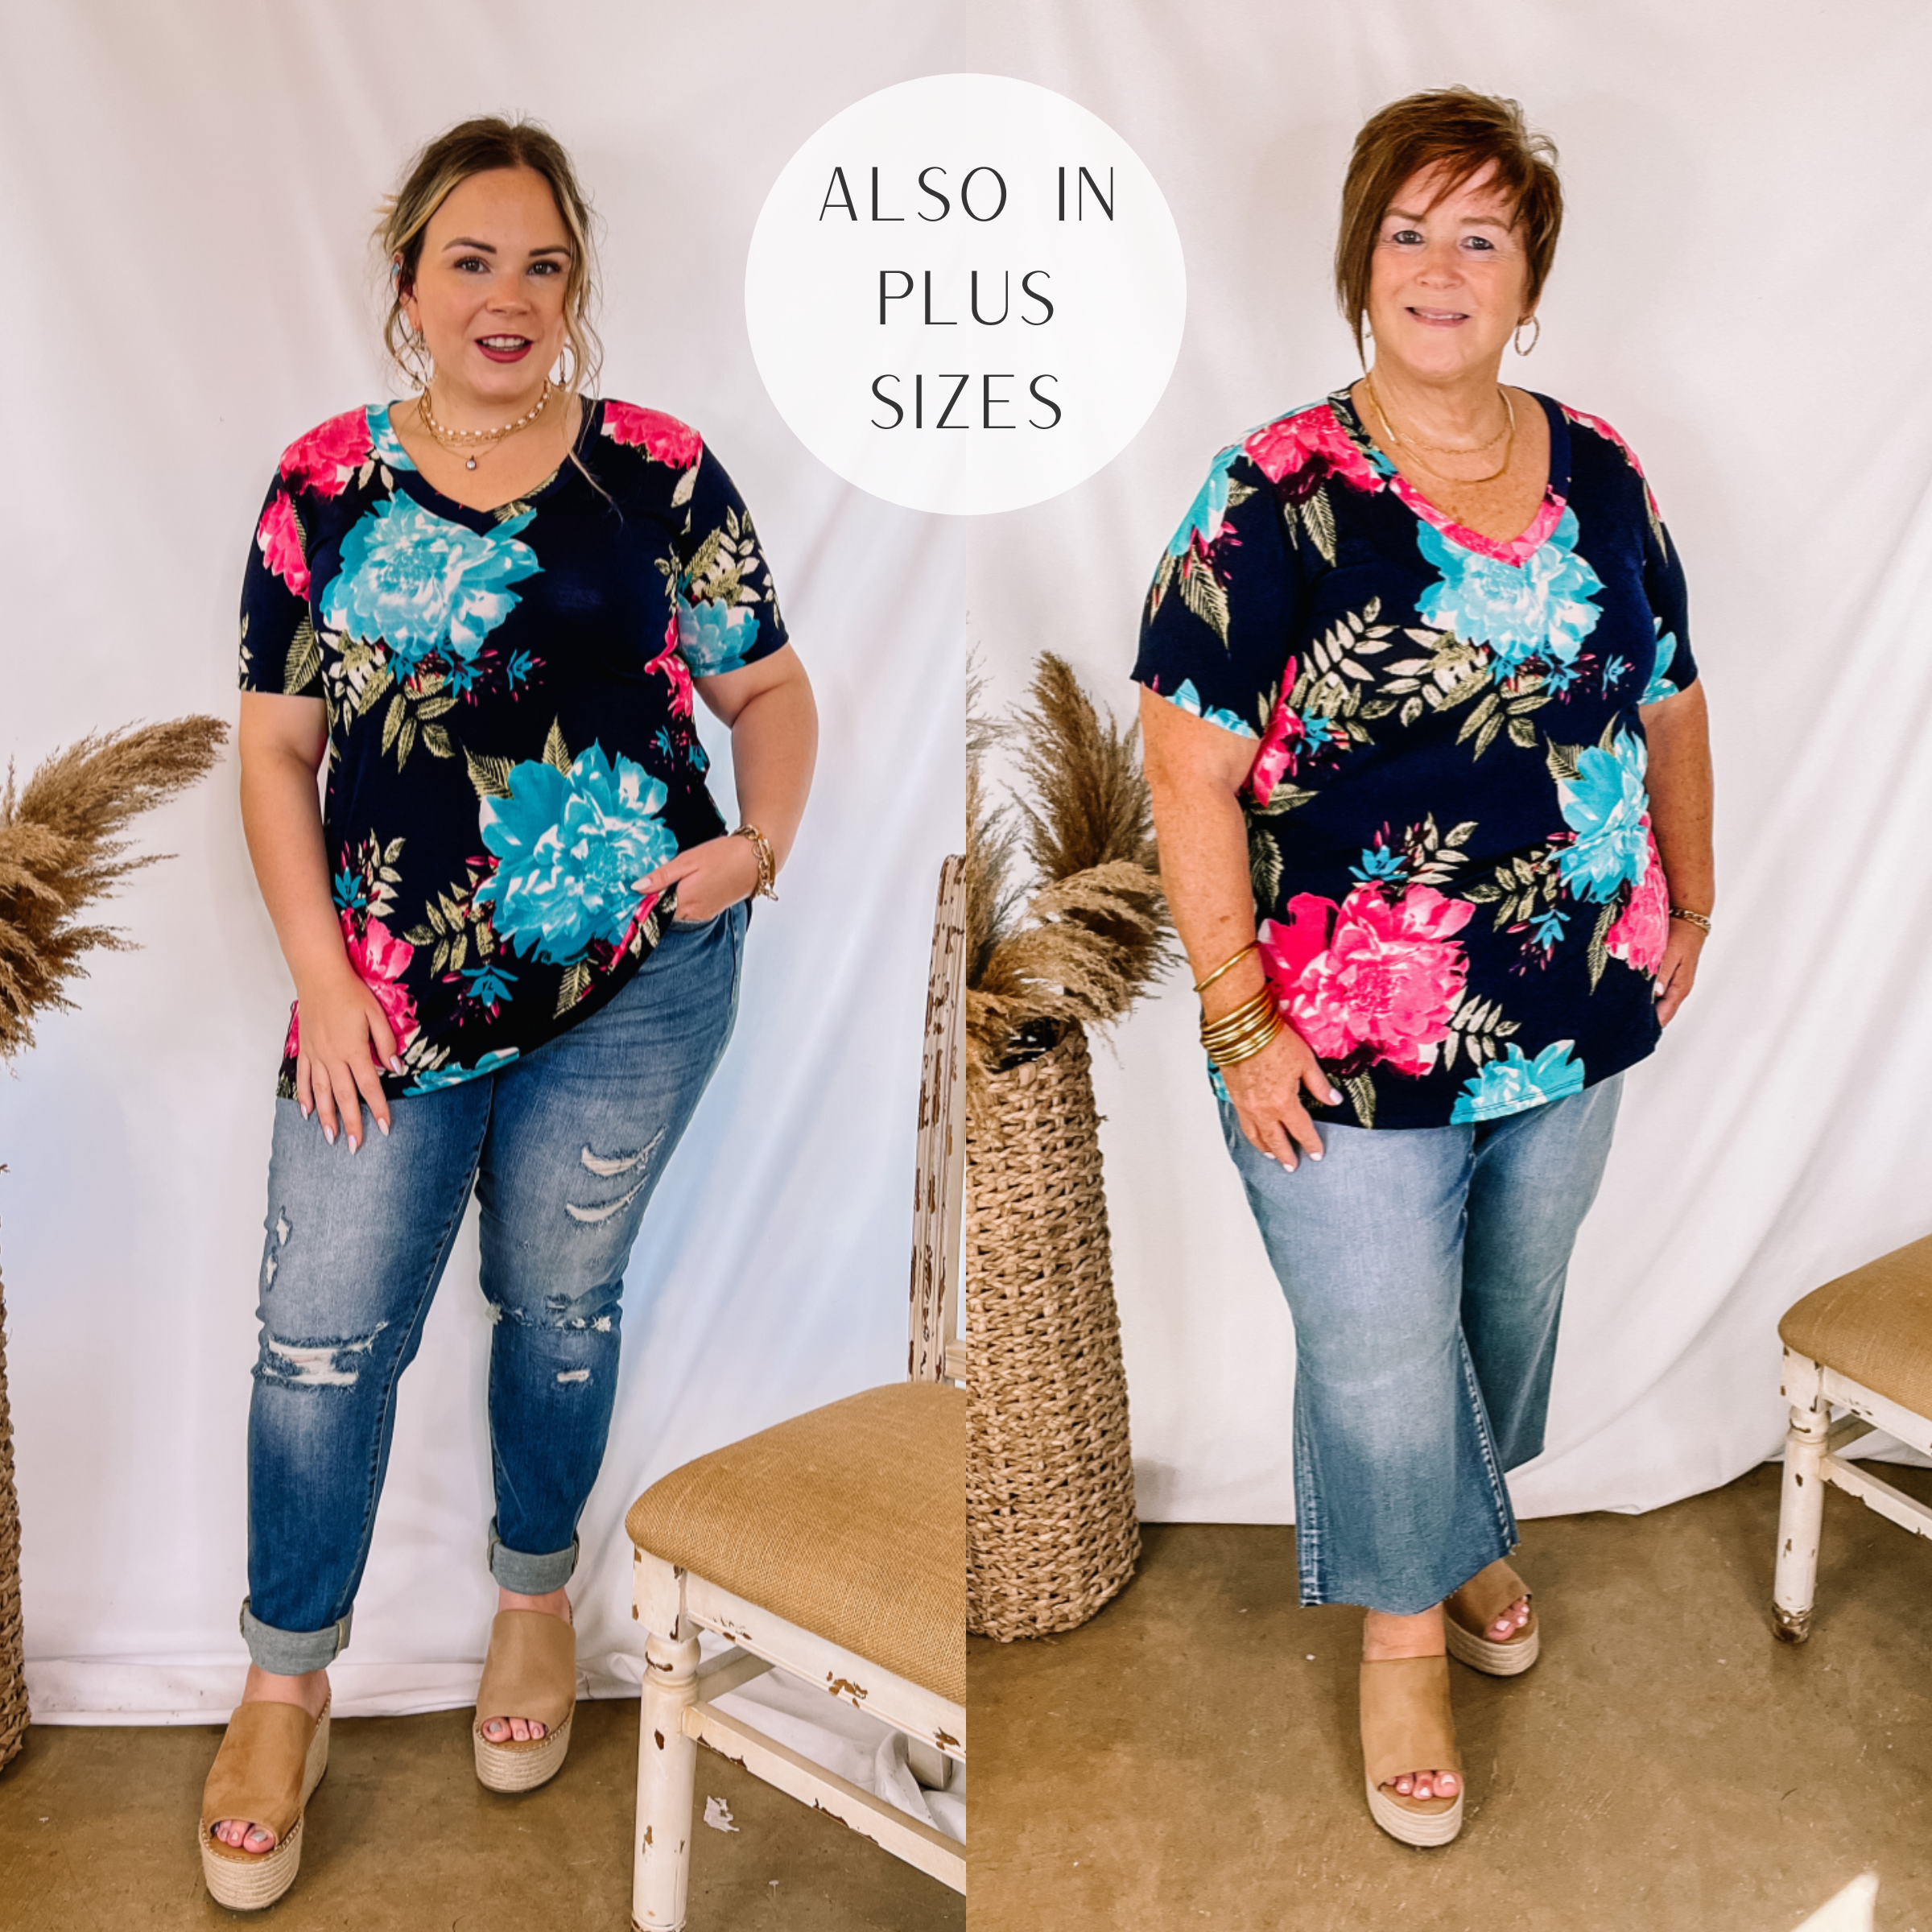 Models are wearing a v-neck top with a floral print in navy blue. Large model has it paired with distressed denim jeans, tan wedges, and gold jewelry. Plus size model has it paired with cropped wide-leg jeans, tan wedges, and gold jewelry. 